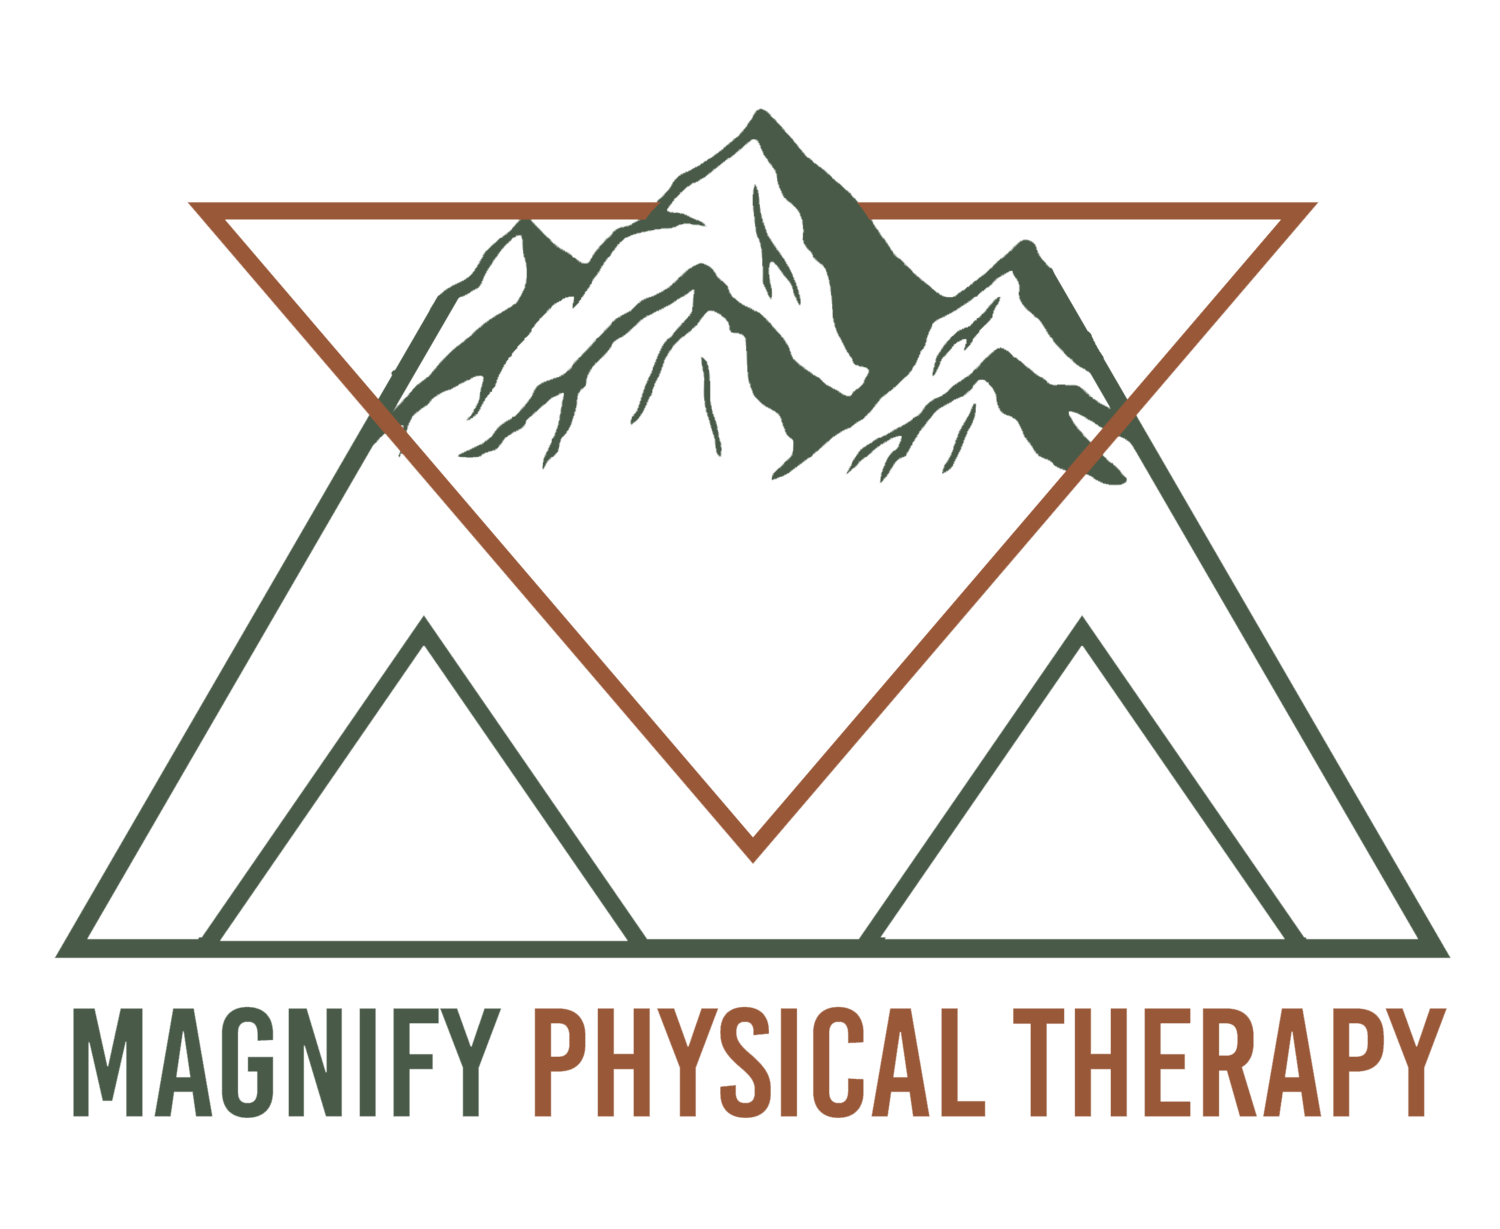 Magnify Physical Therapy, LLC | Physical Therapy | Dover, NH &amp; Portsmouth, NH